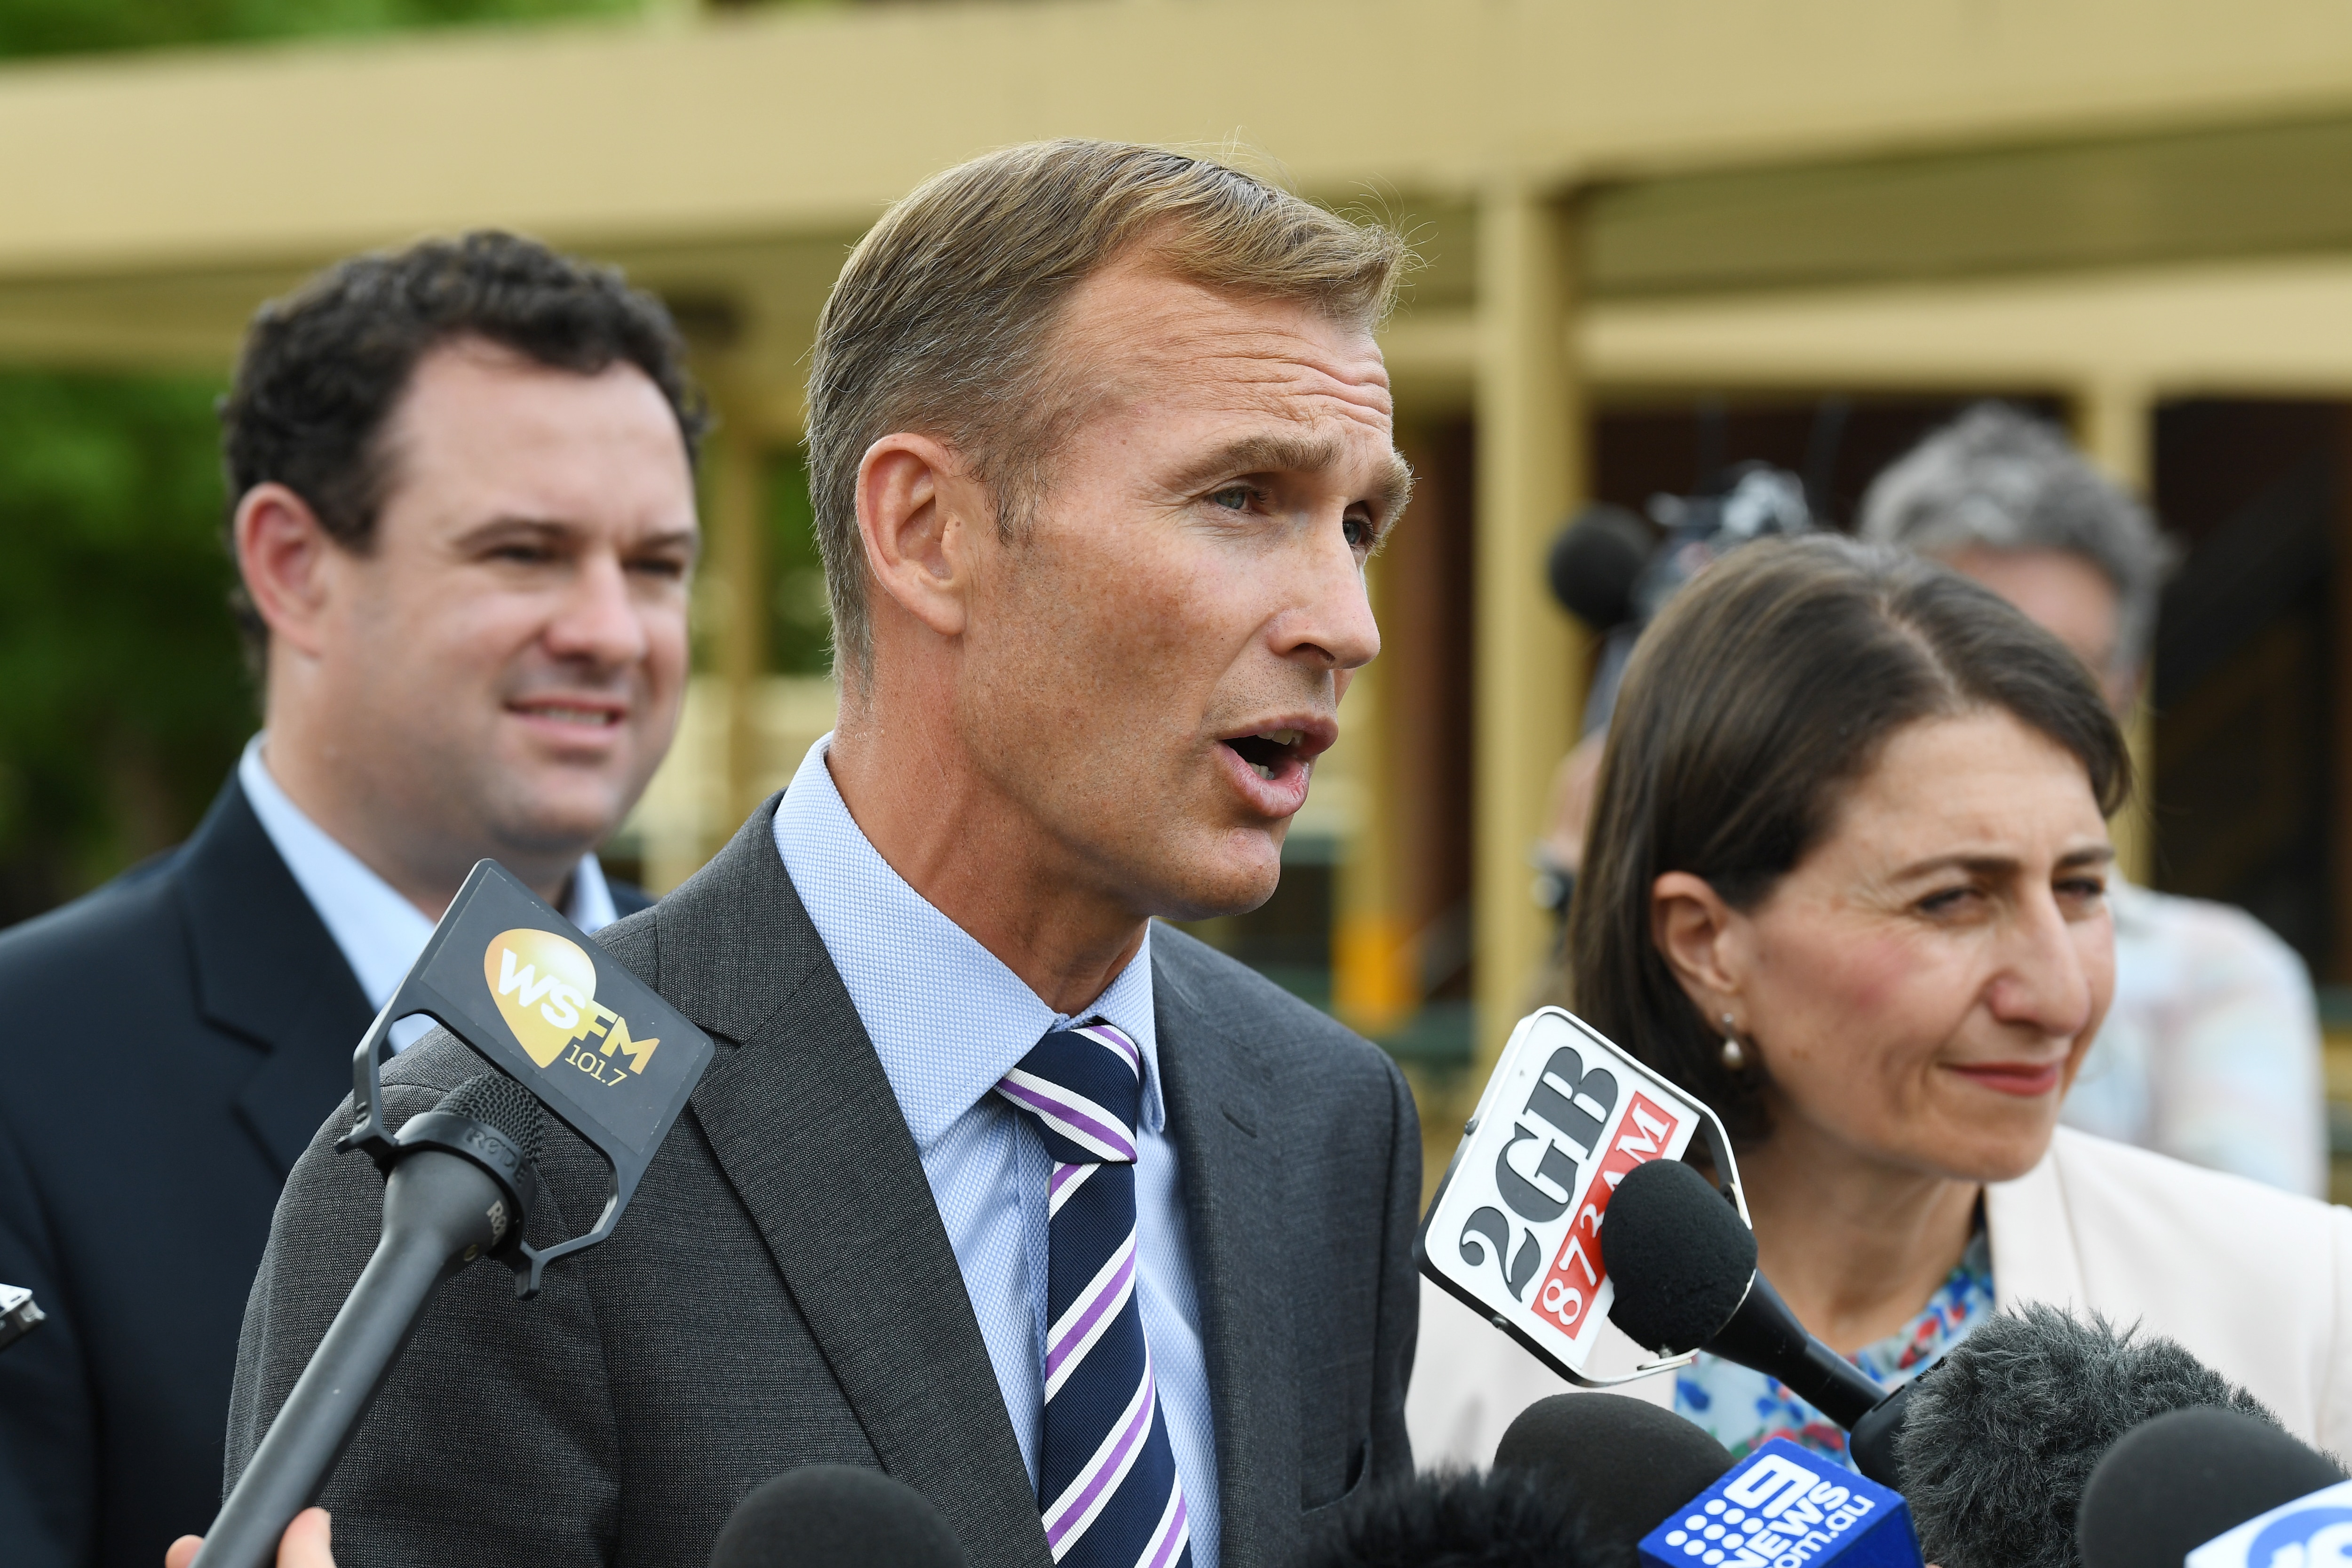 Education Minister Rob Stokes (centre) during a visit York Public School in South Penrith, Sydney, Wednesday.